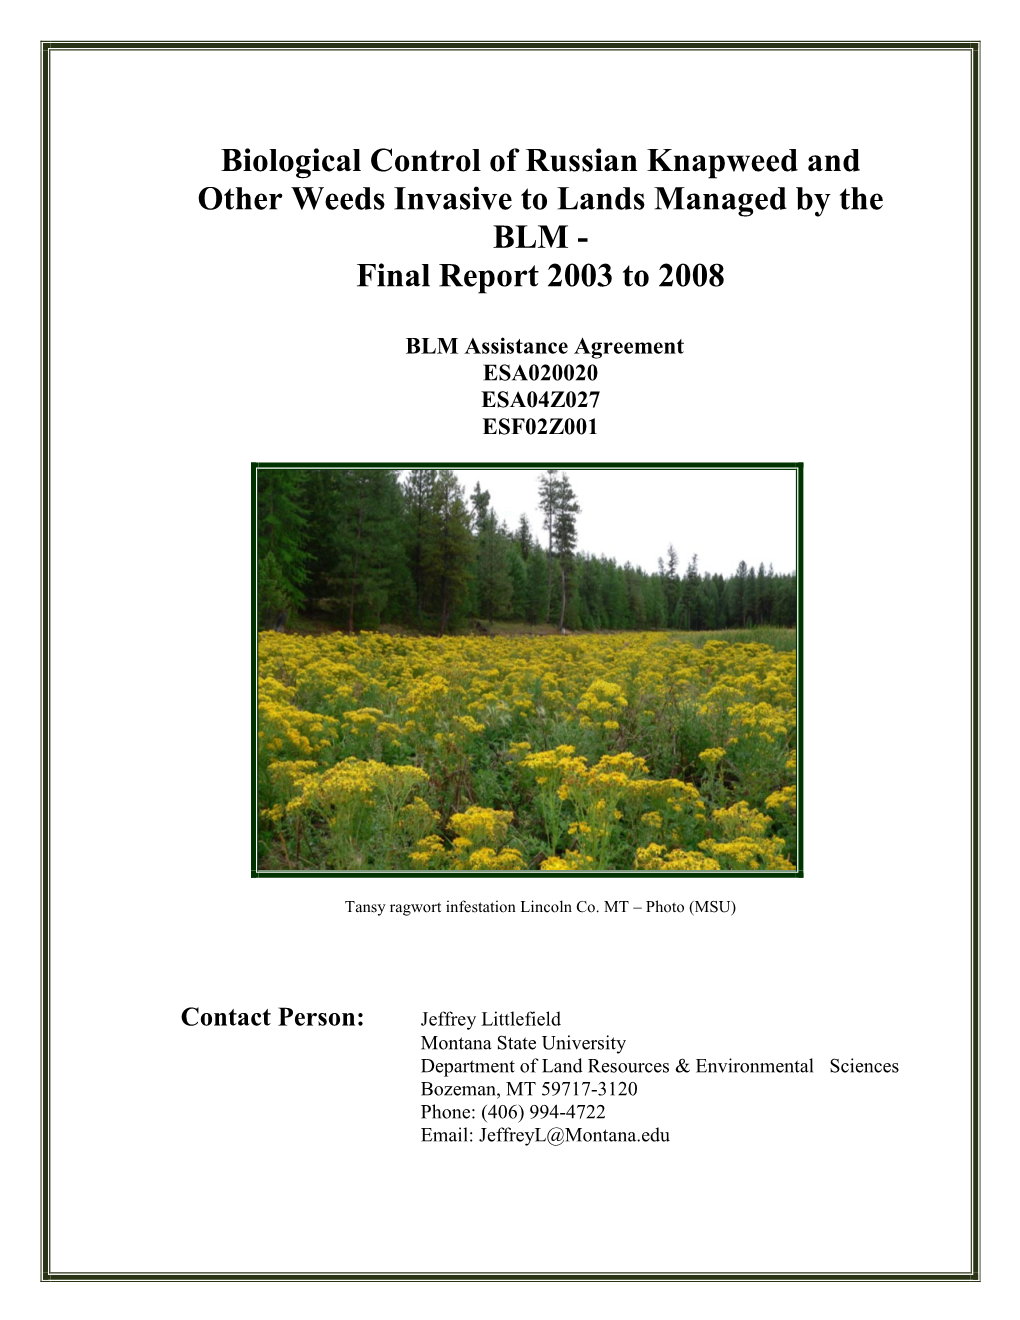 Biological Control of Russian Knapweed and Other Weeds Invasive to Lands Managed by the BLM - Final Report 2003 to 2008